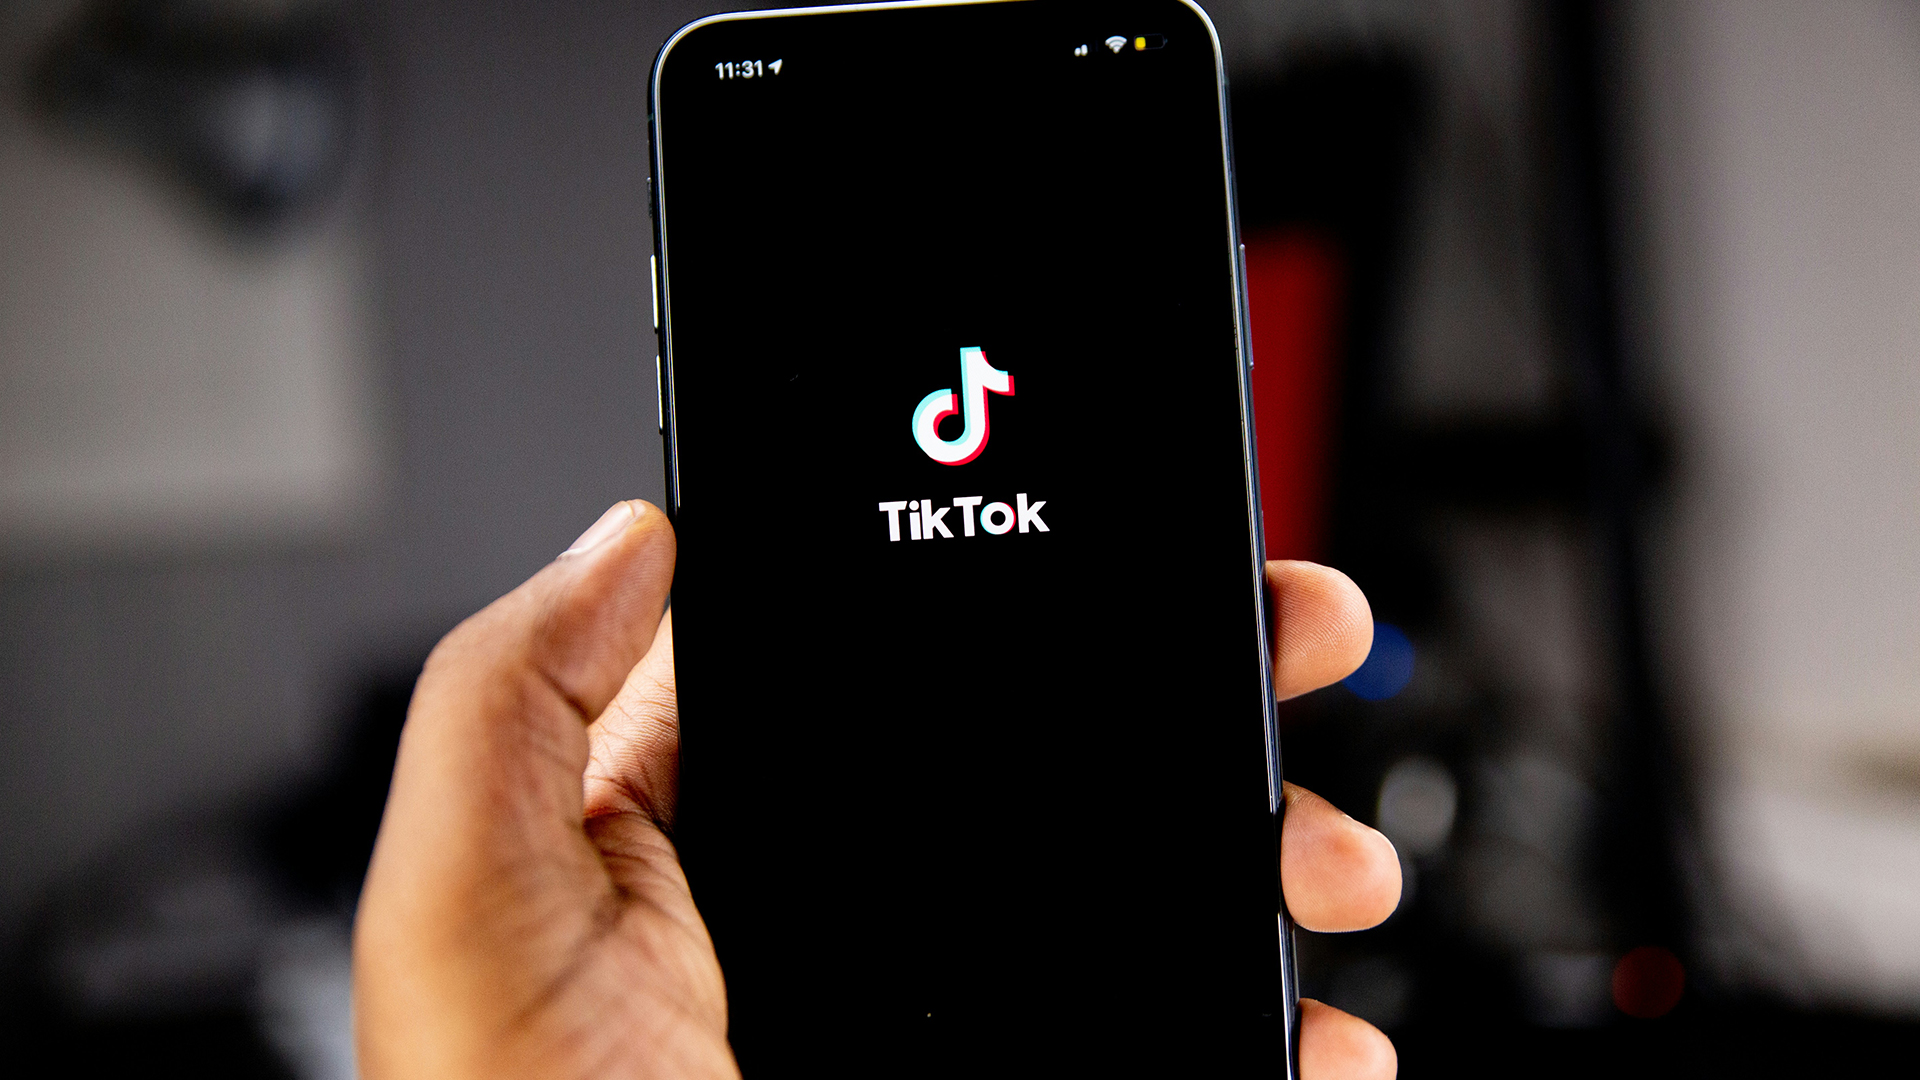 TikTok will take over social media, leaving other platforms to adapt: Report